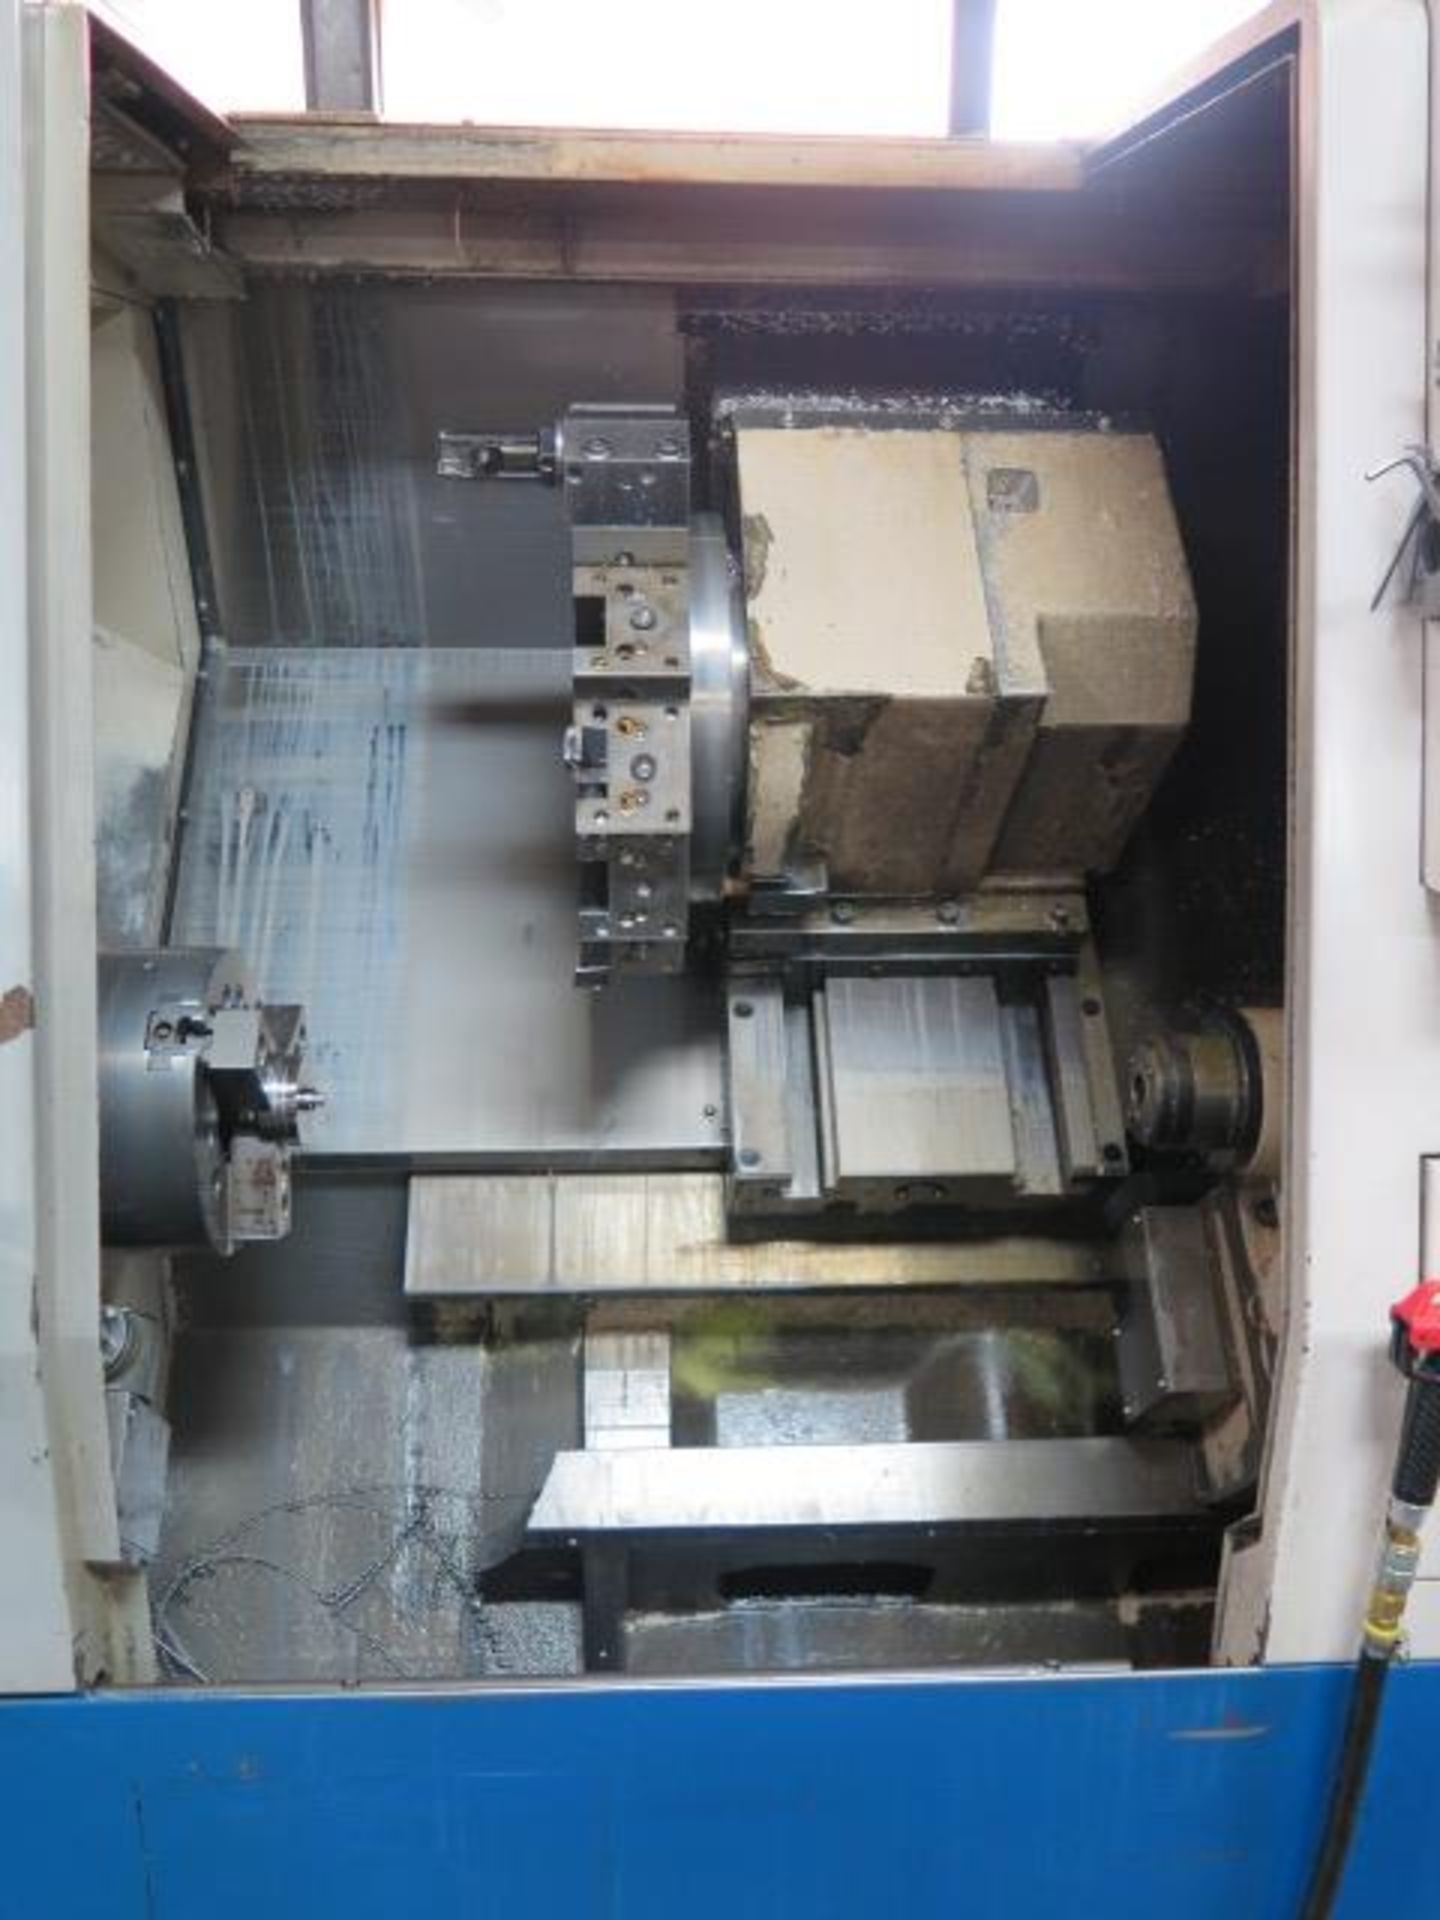 2000 Daewoo PUMA 300B CNC Turning Center s/n PN250827 w/ Fanuc Series 18i-T Controls, SOLD AS IS - Image 5 of 15